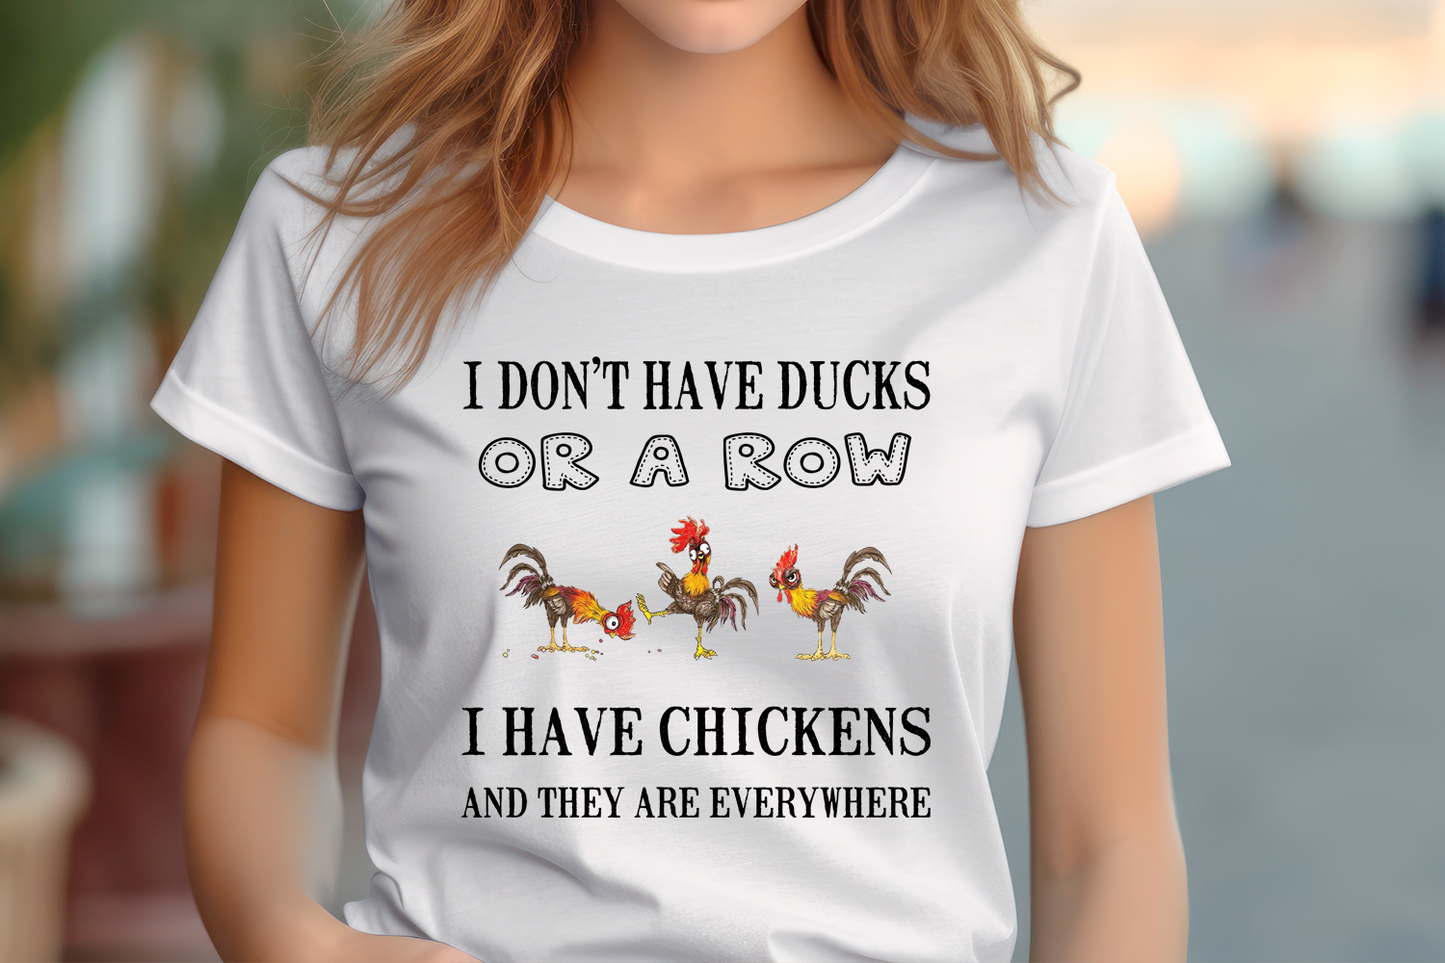 I DON'T HAVE DUCKS OR ROWS